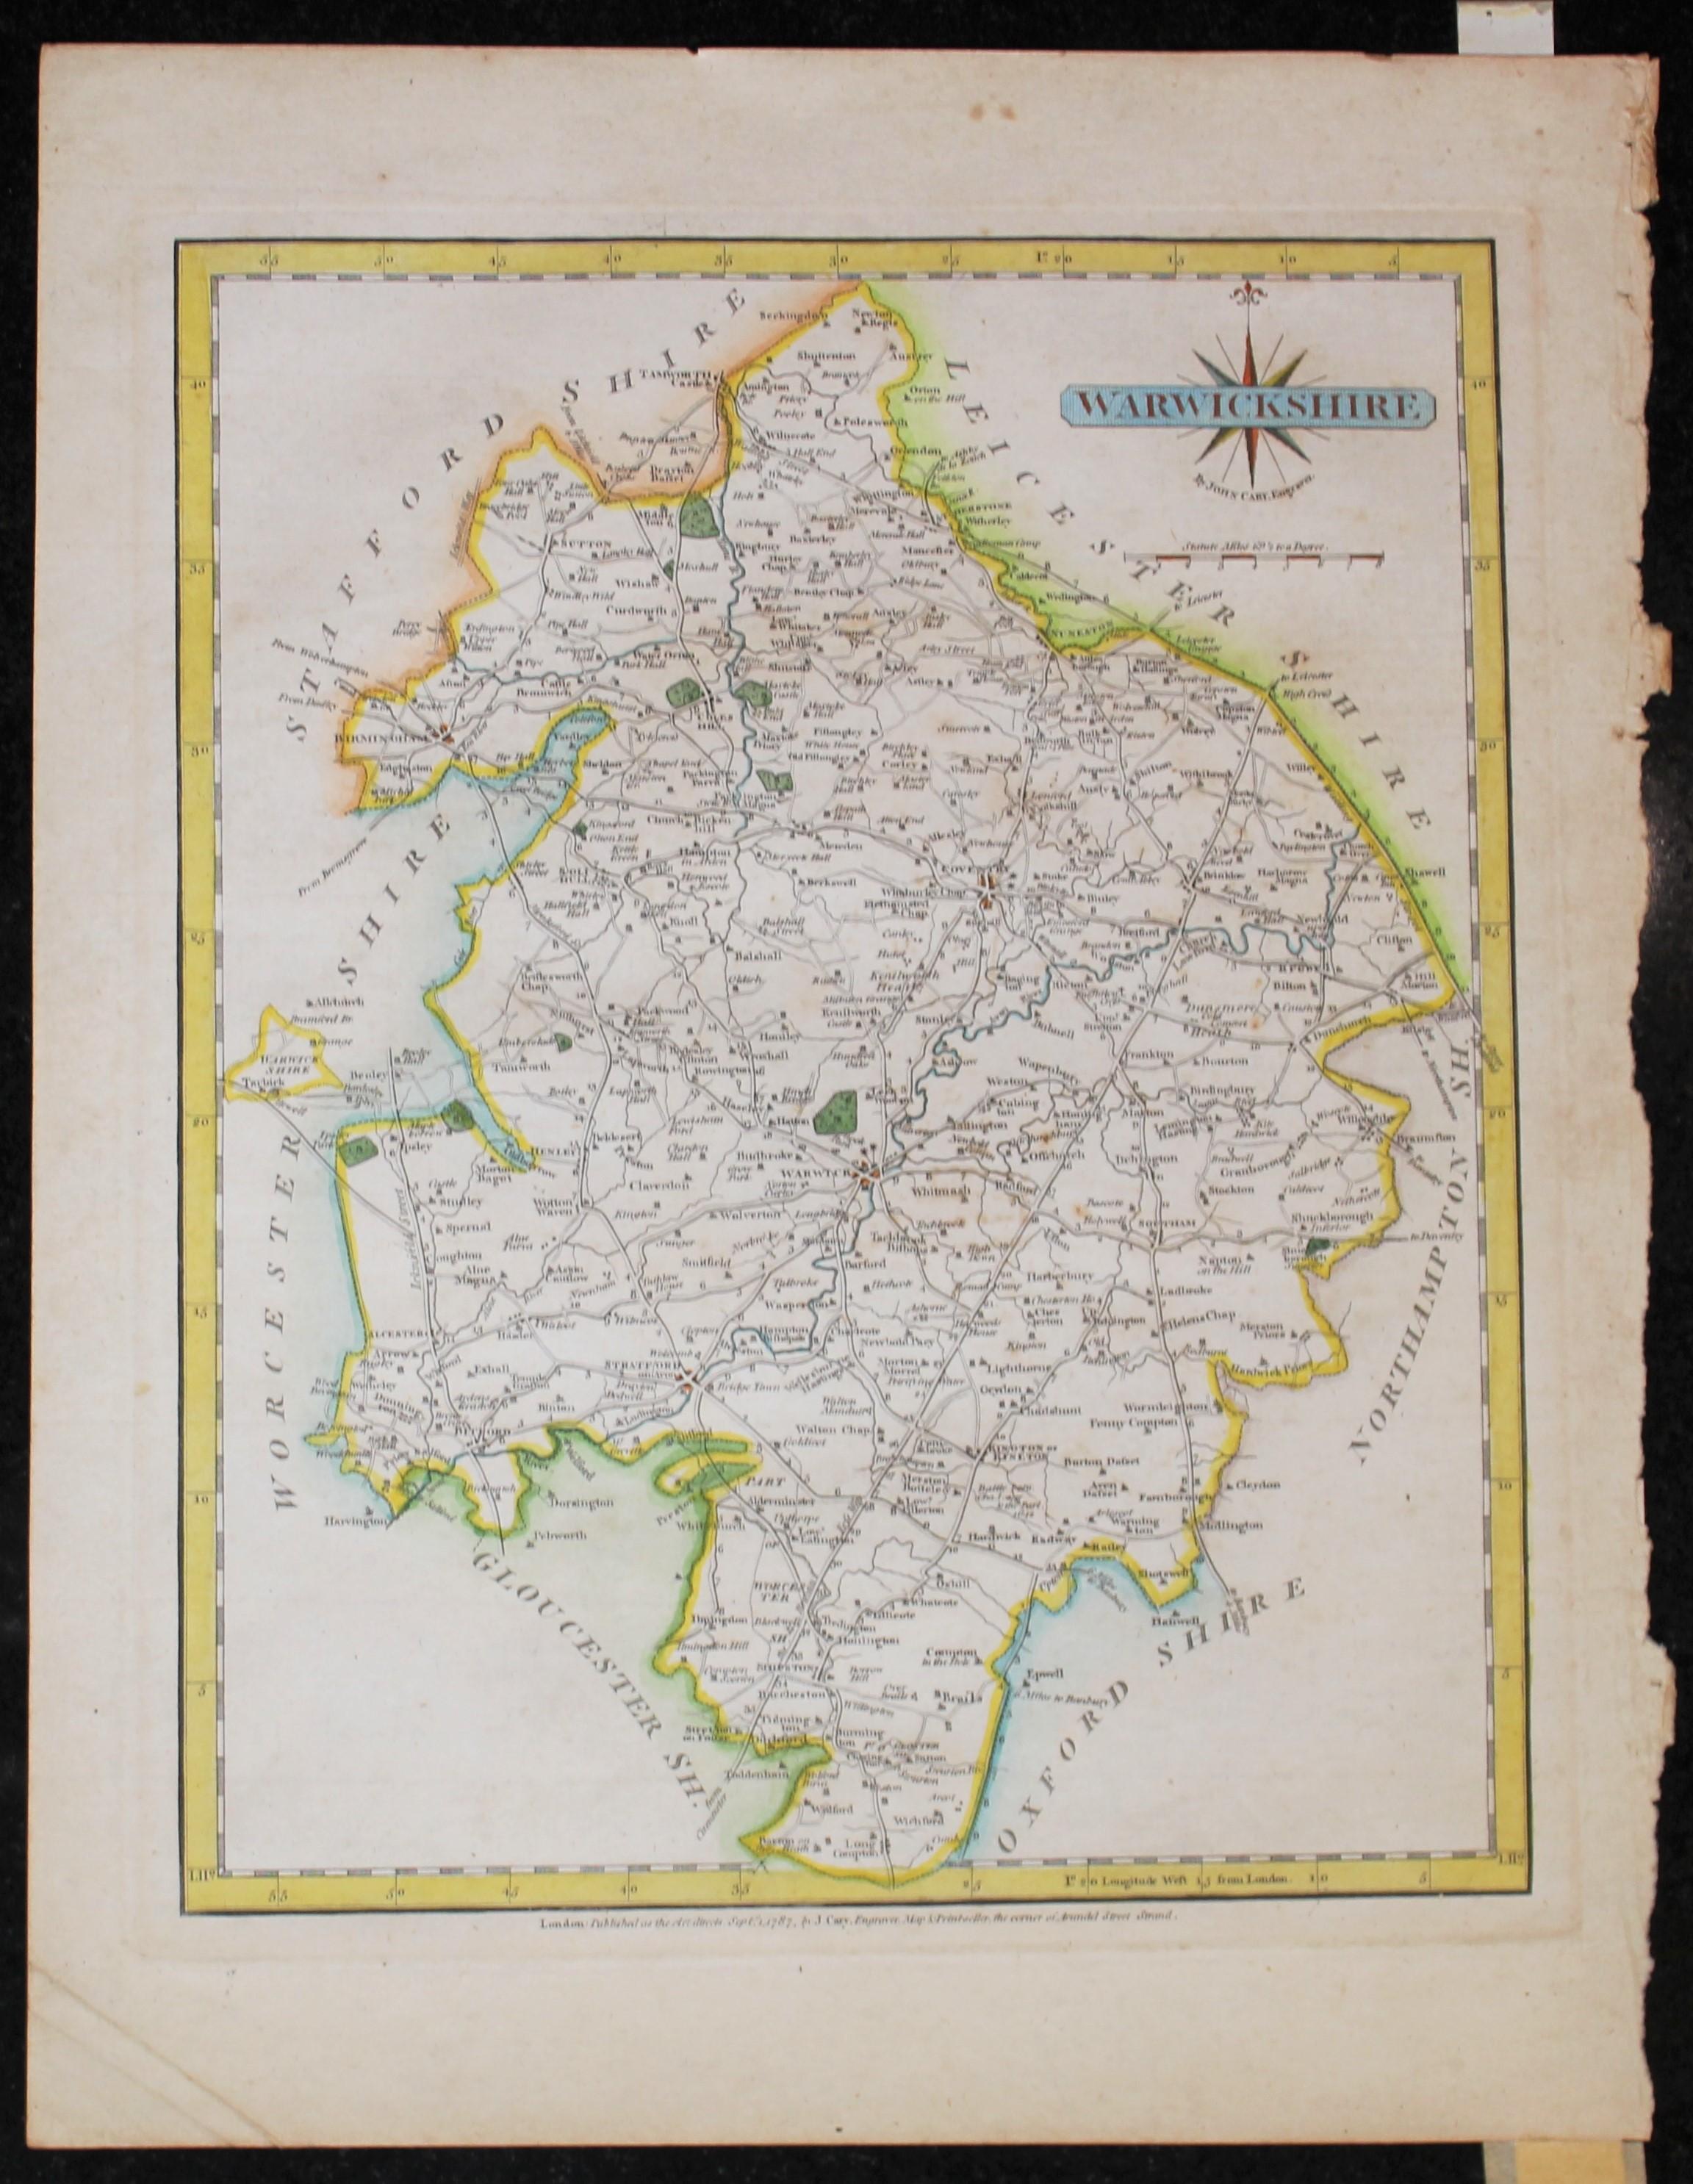 Warwickshire Hand Painted Map Engraving from 